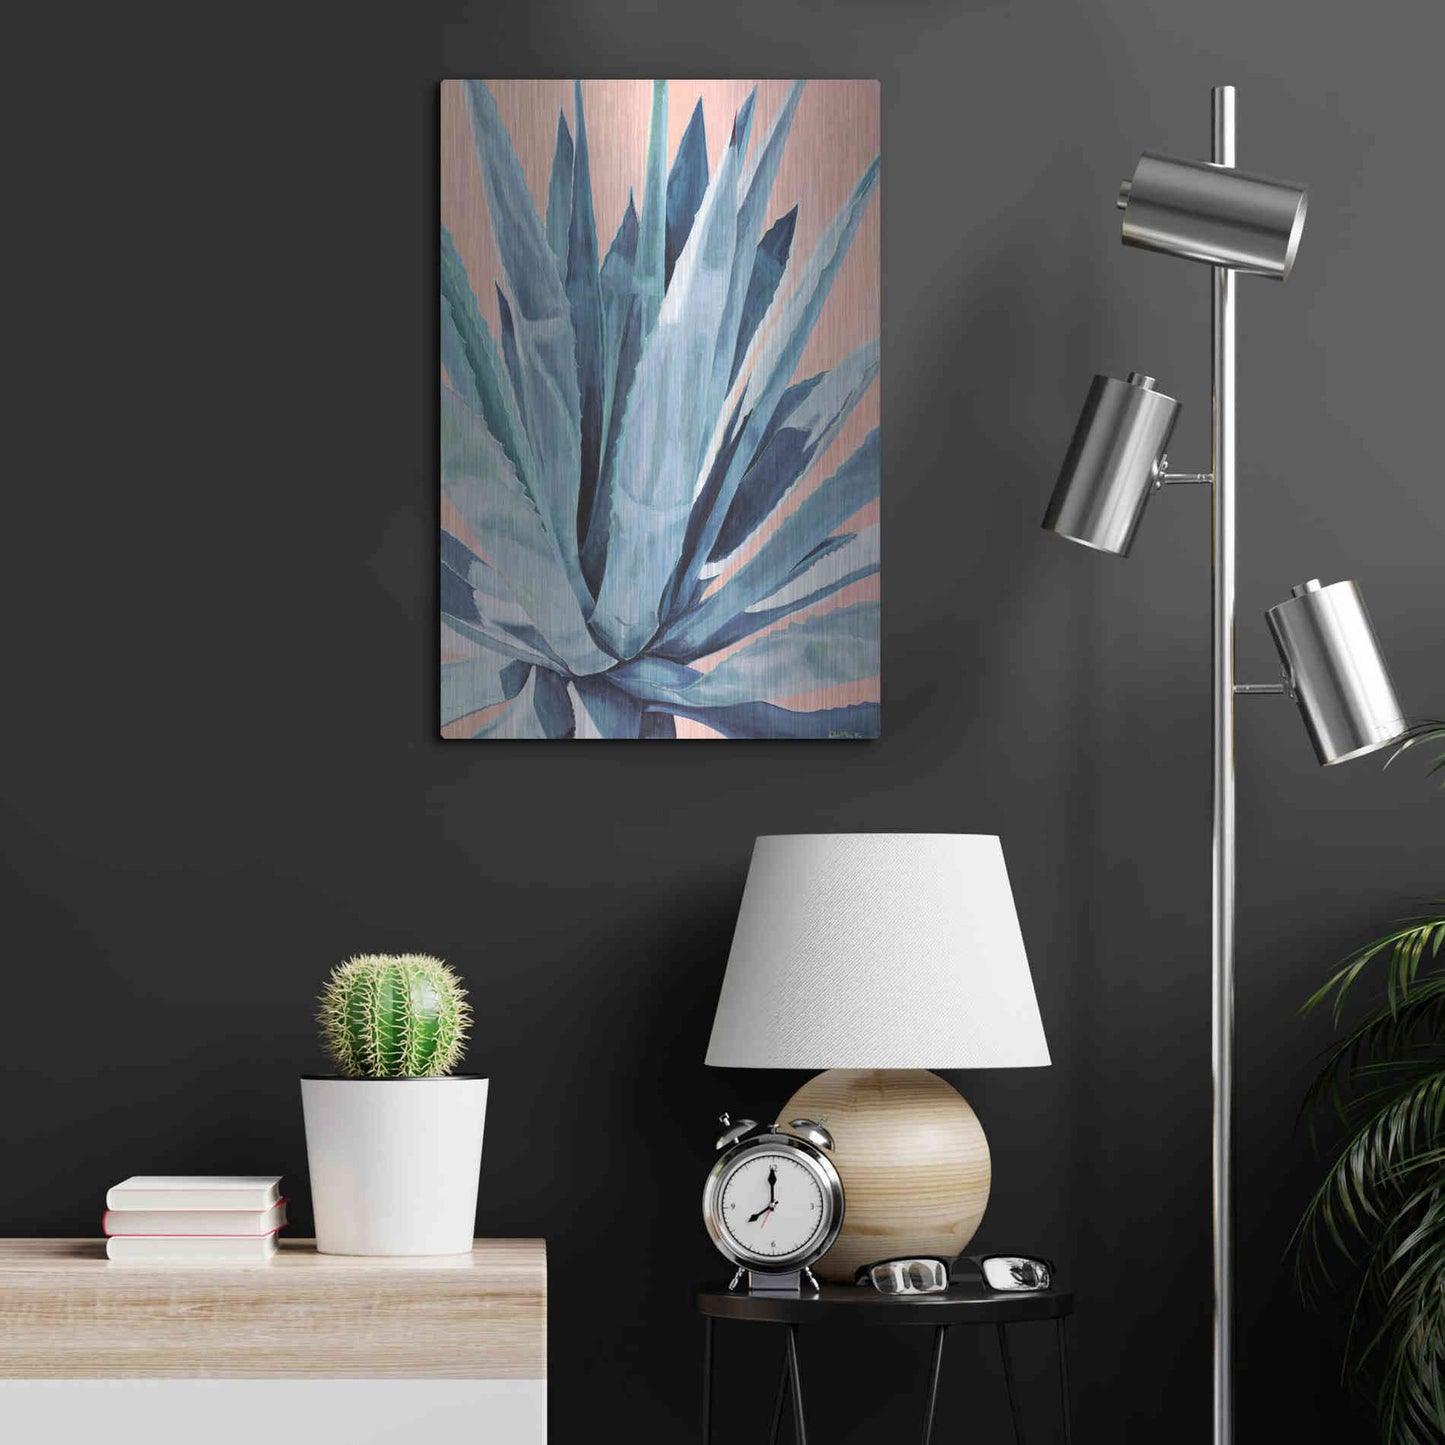 Luxe Metal Art 'Agave With Coral by Alana Clumeck Metal Wall Art,16x24